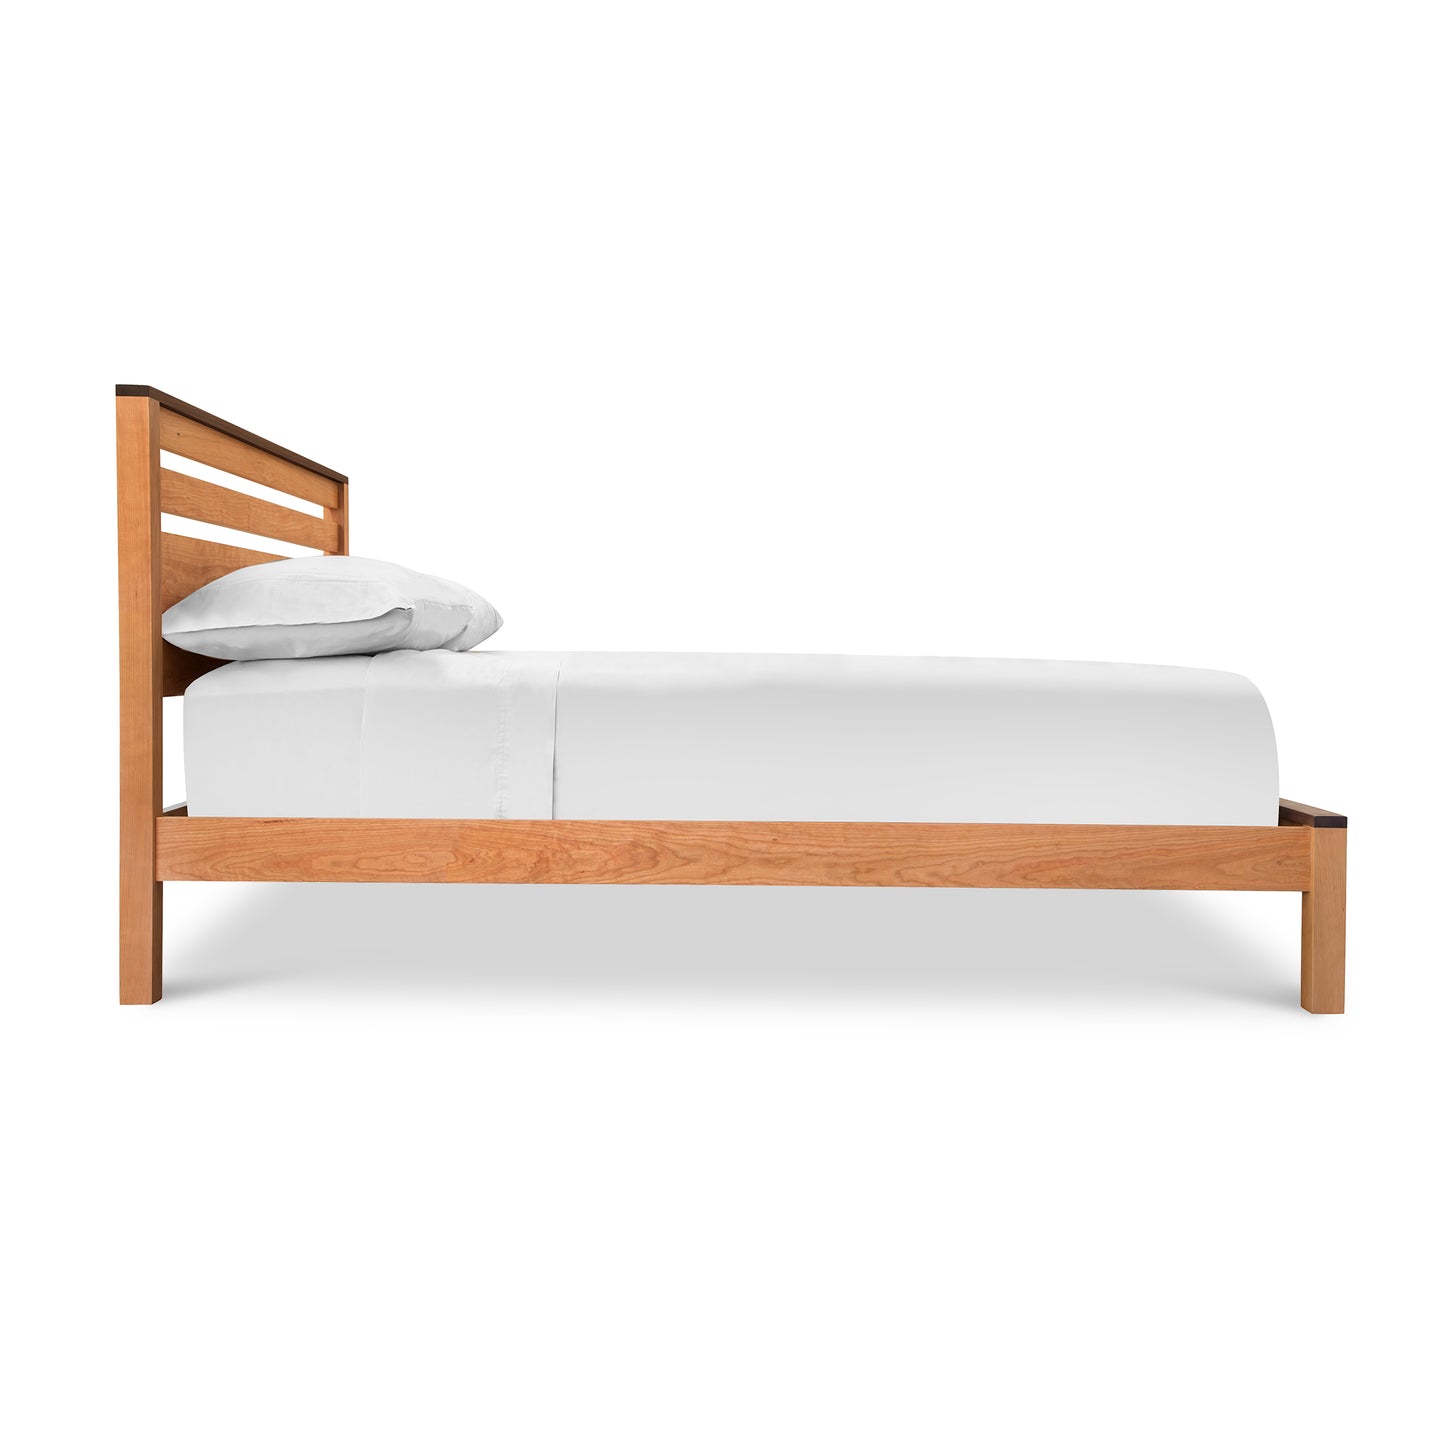 The Vermont Furniture Designs Skyline Panel Bed is a handmade-to-order bed with a wooden frame crafted from natural eco-friendly materials. It features white sheets and is finished with a hand-rubbed oil finish.